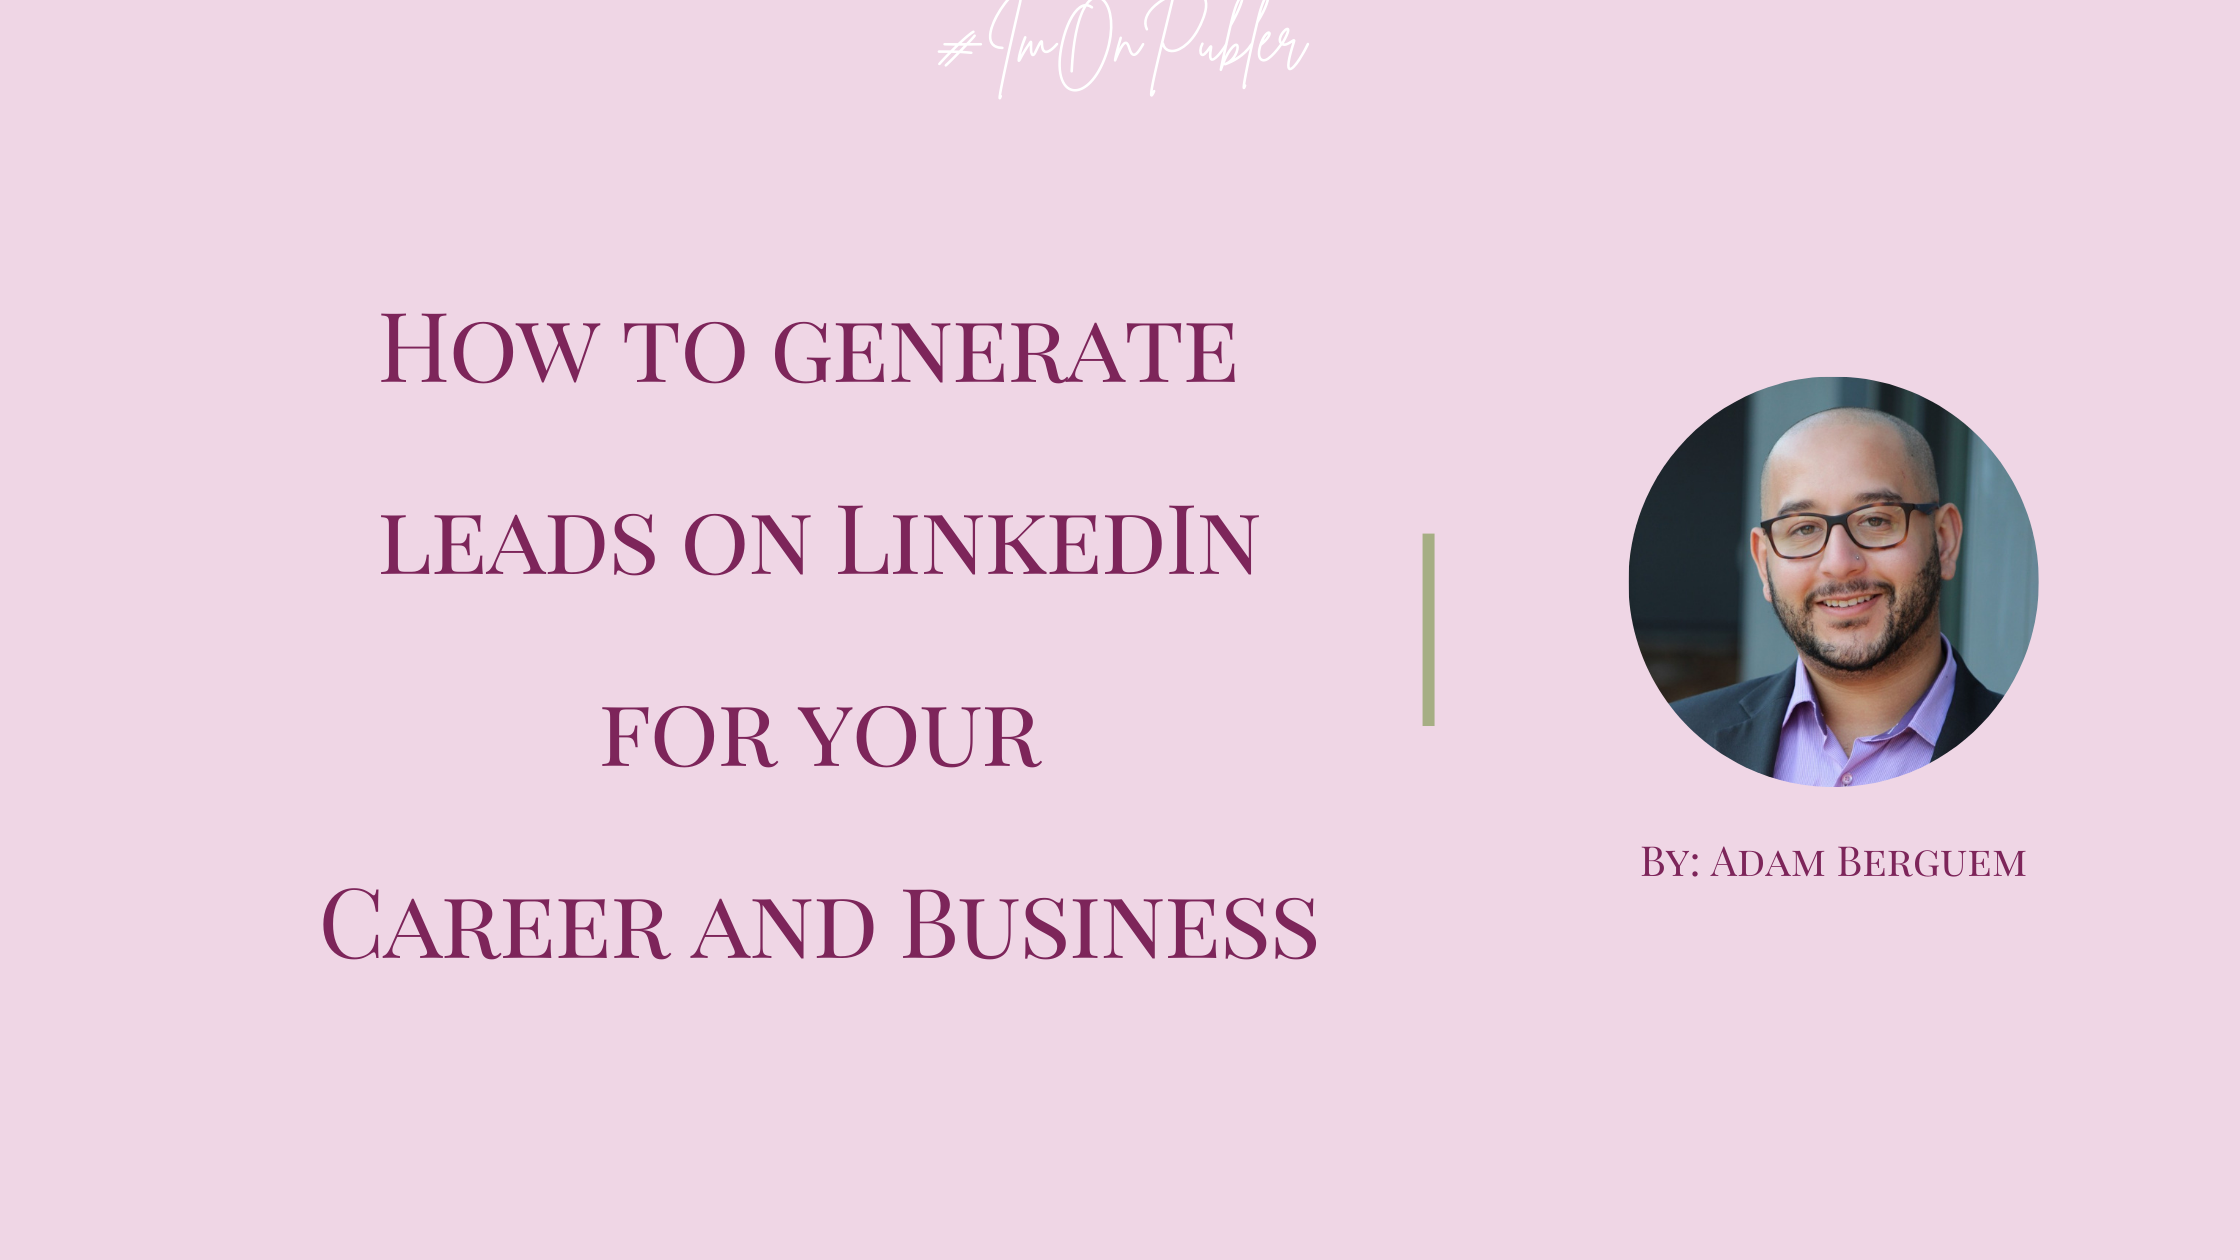 How to generate leads on LinkedIn for your Career and Business by Adam Berguem